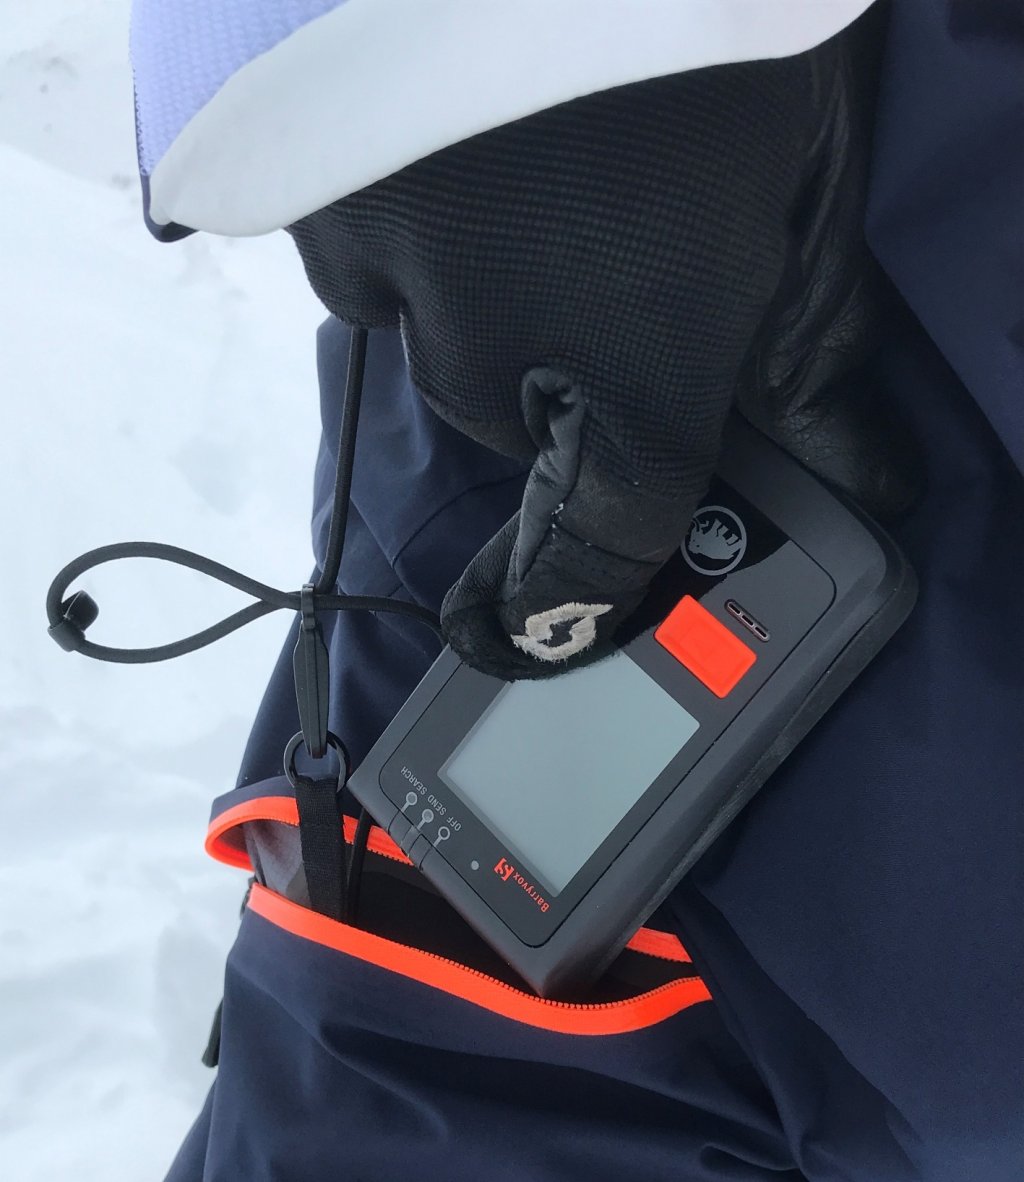 Mammut LA LISTE Pro HS pants - pocket with loop for attaching e.g. an avalanche transceiver